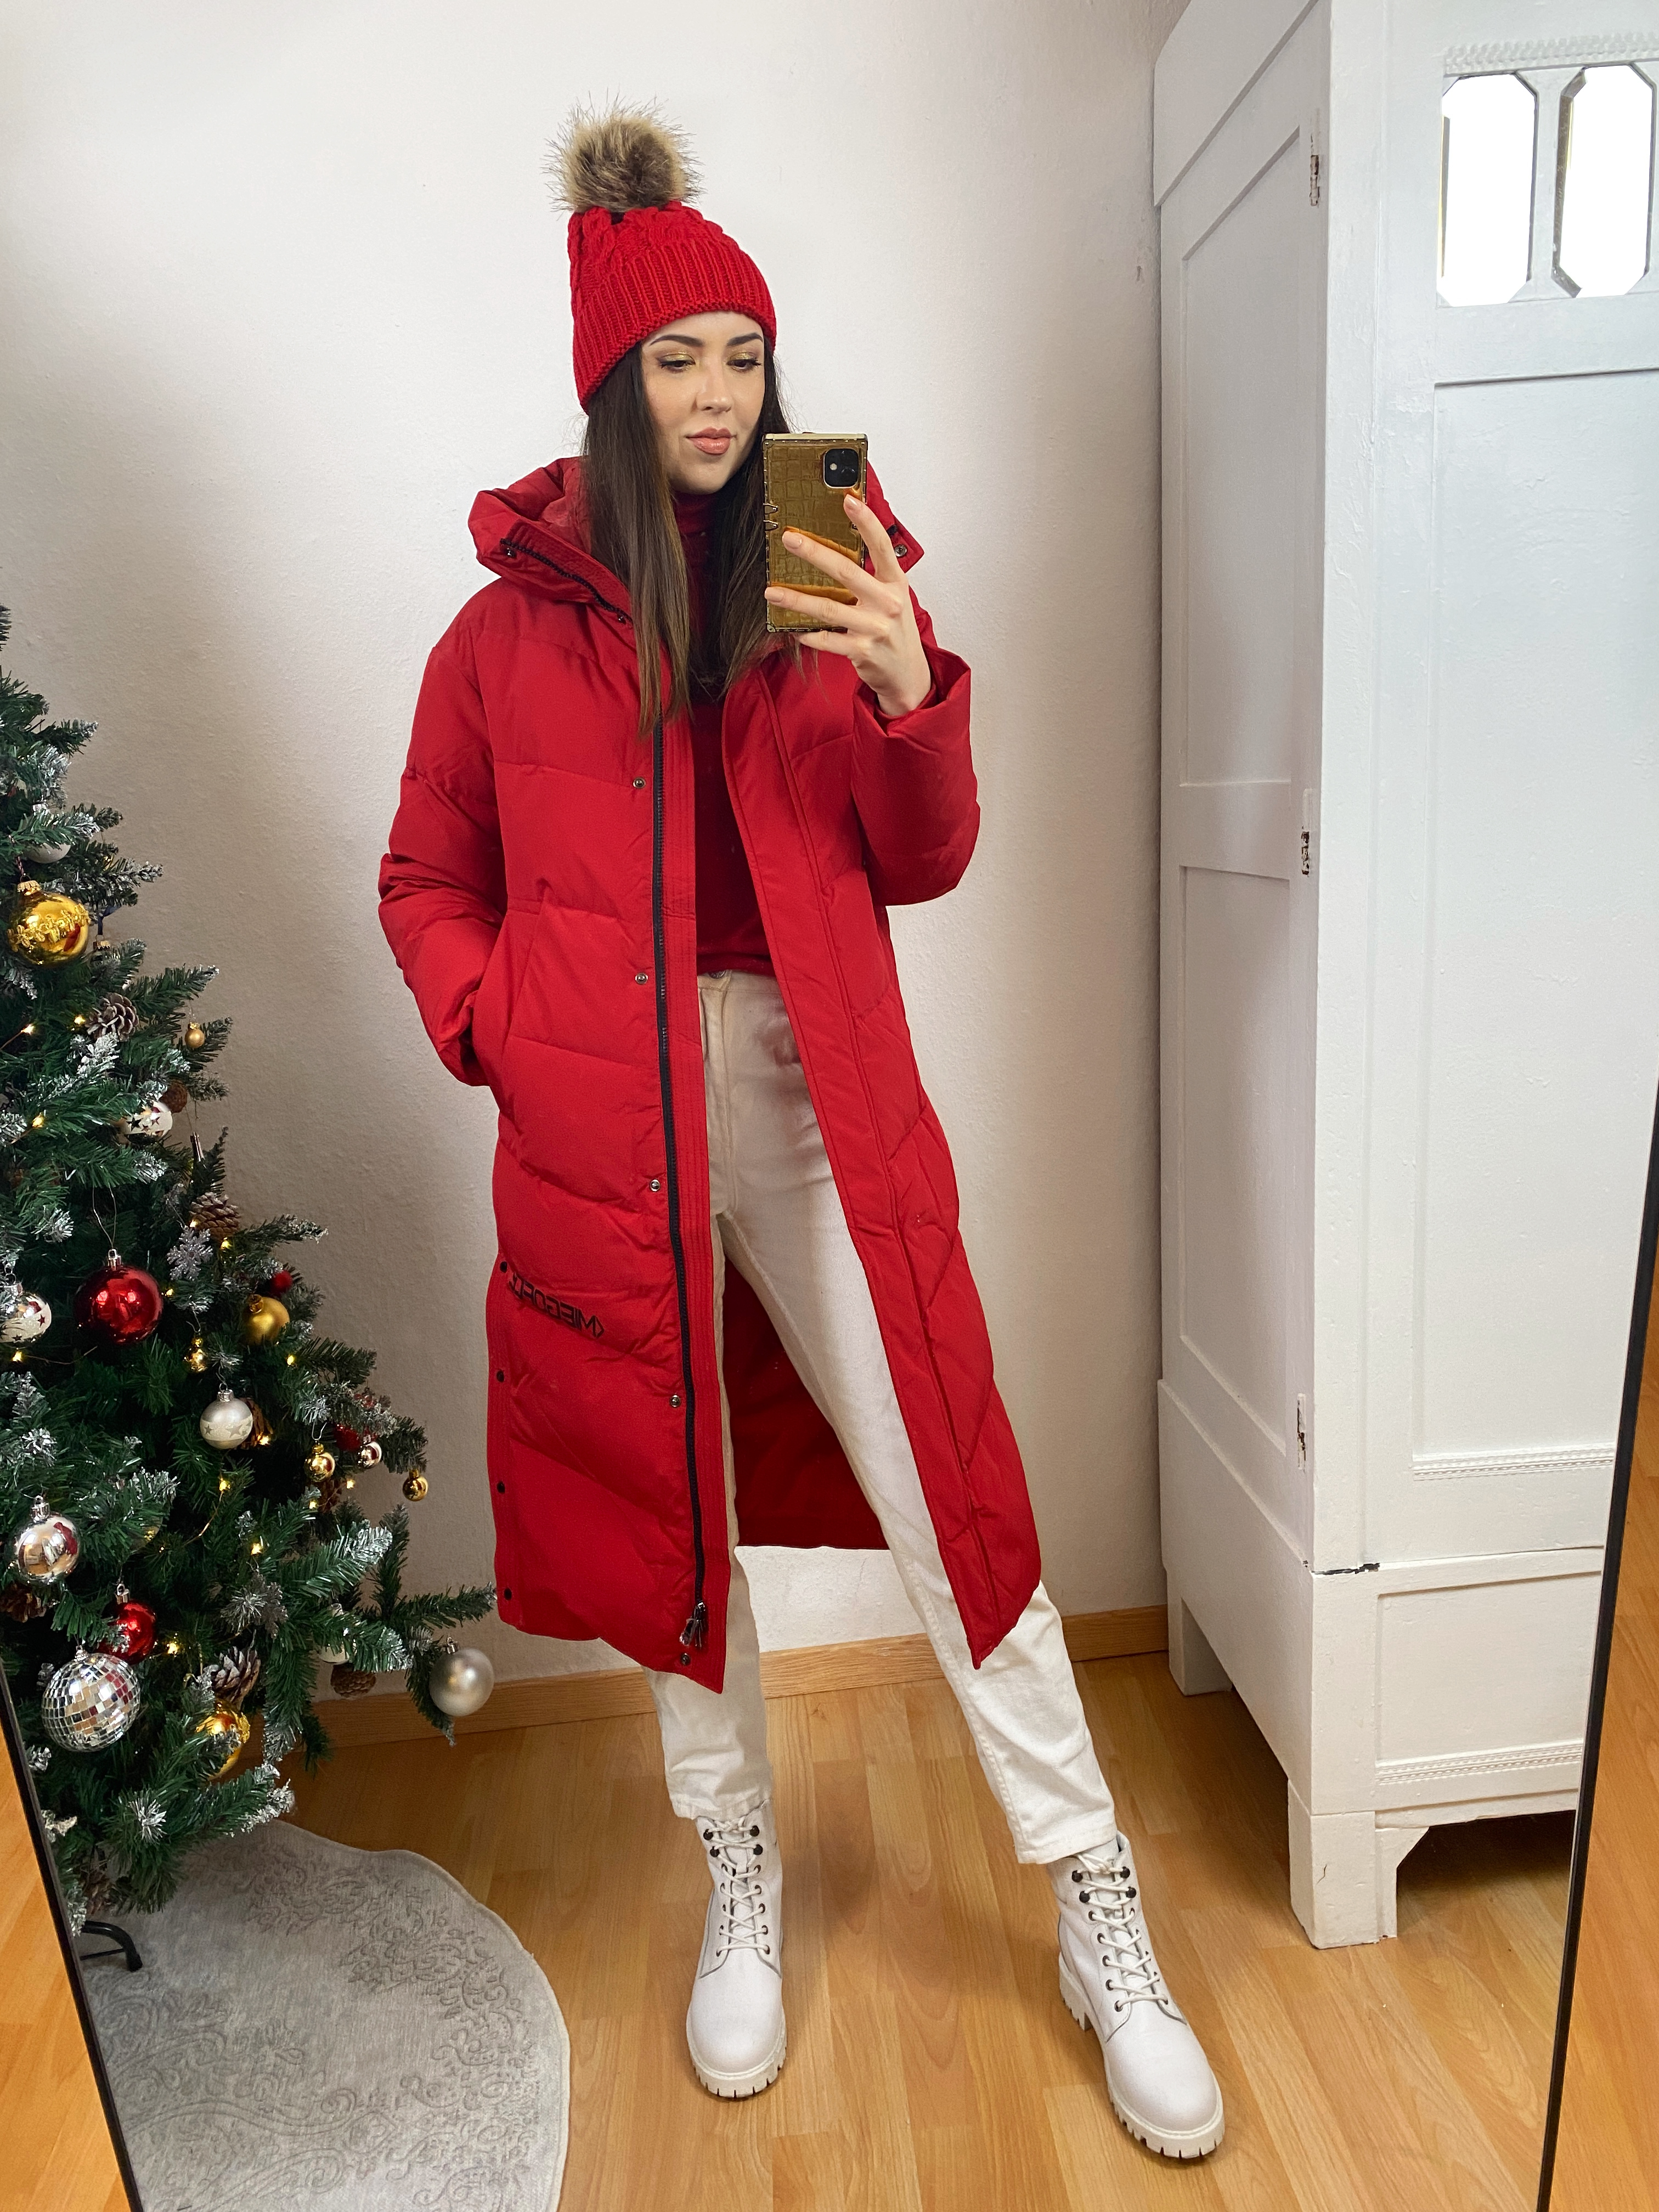 Red Puffer Jacket and White Jeans Outfit